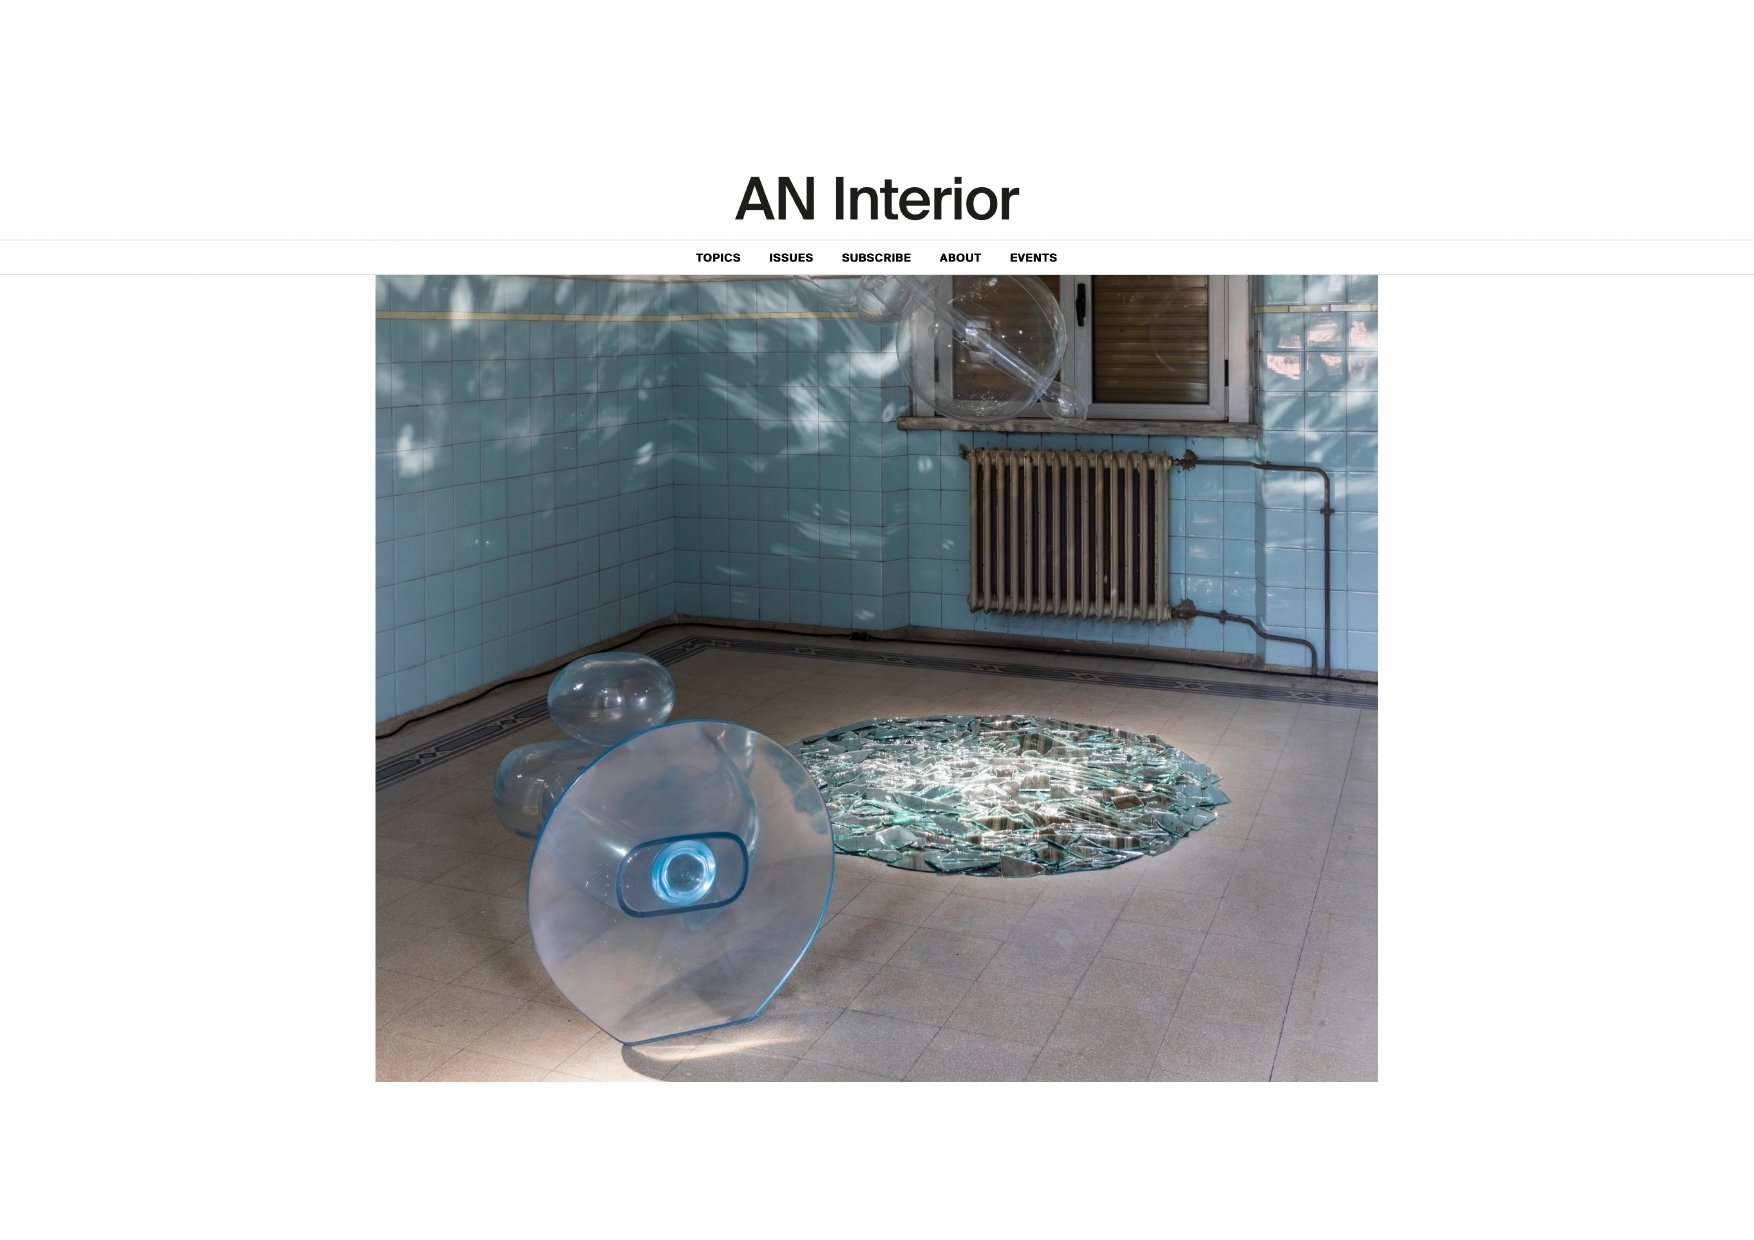 https://aninteriormag.com/our-favorite-moments-from-milan-design-week-2022-alcova/